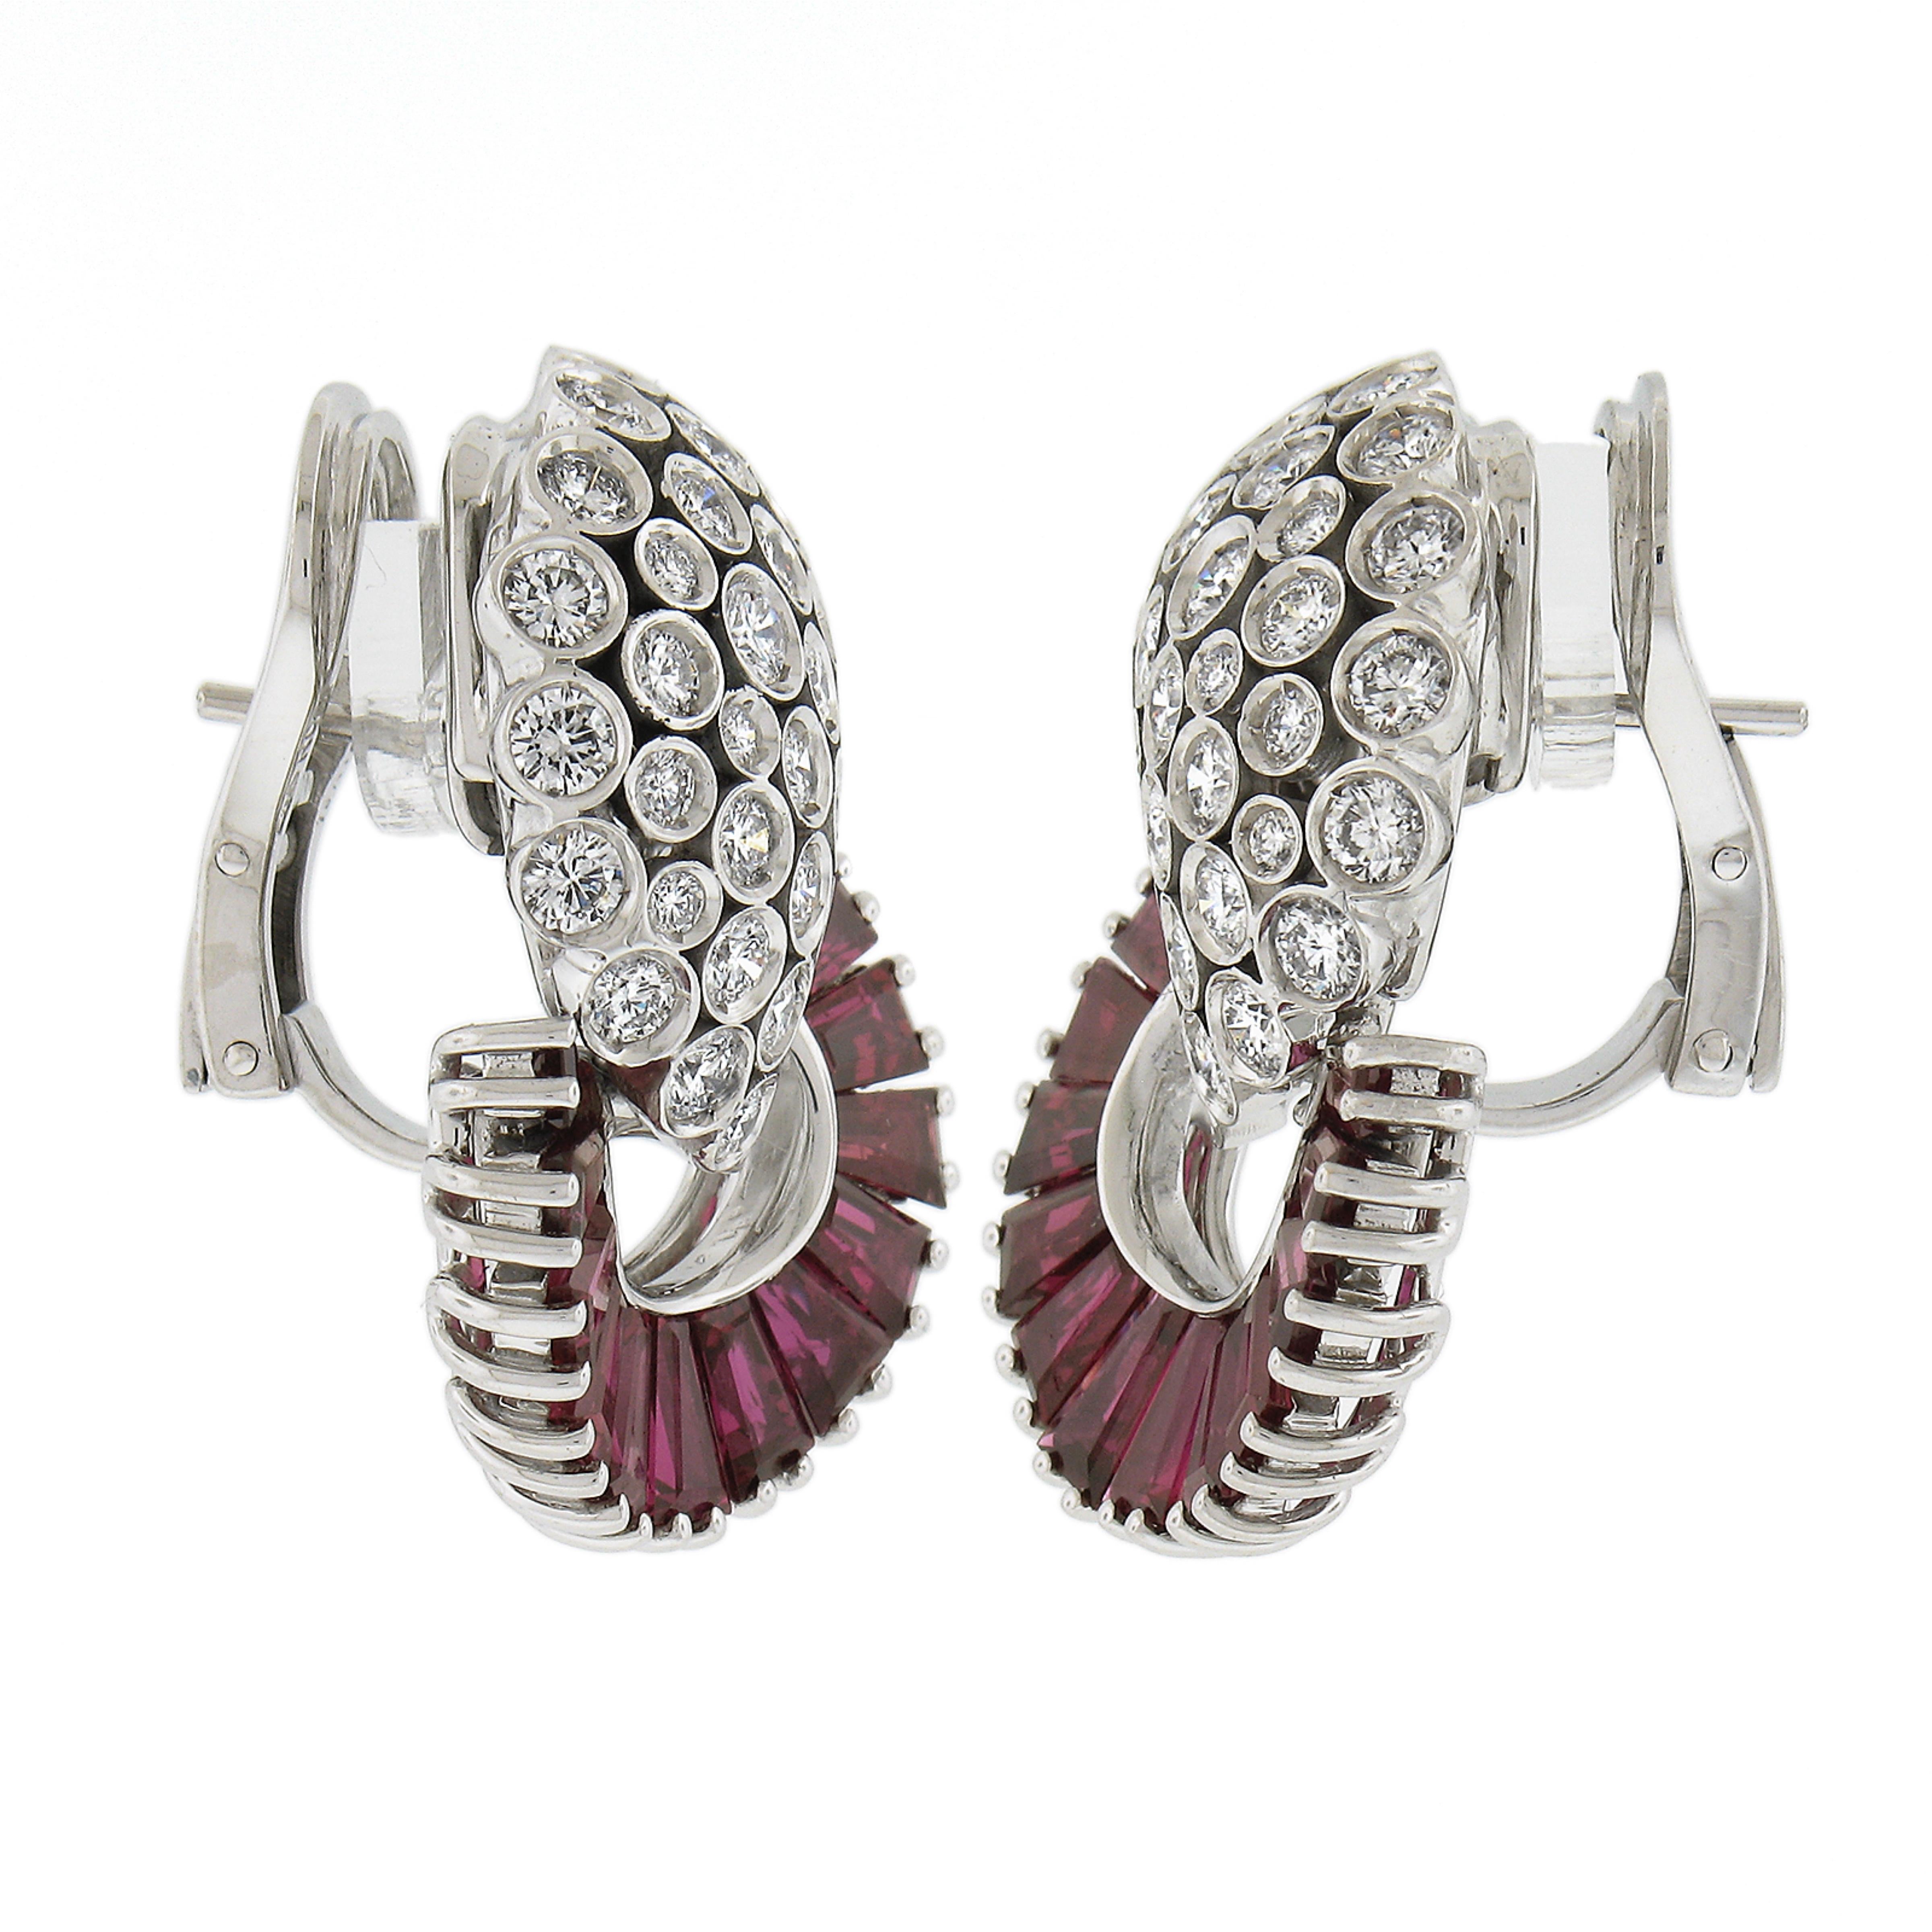 RCM 18K White Gold GIA Baguette Ruby & Bezel Diamond Cluster 8.35ctw Earrings In Excellent Condition For Sale In Montclair, NJ